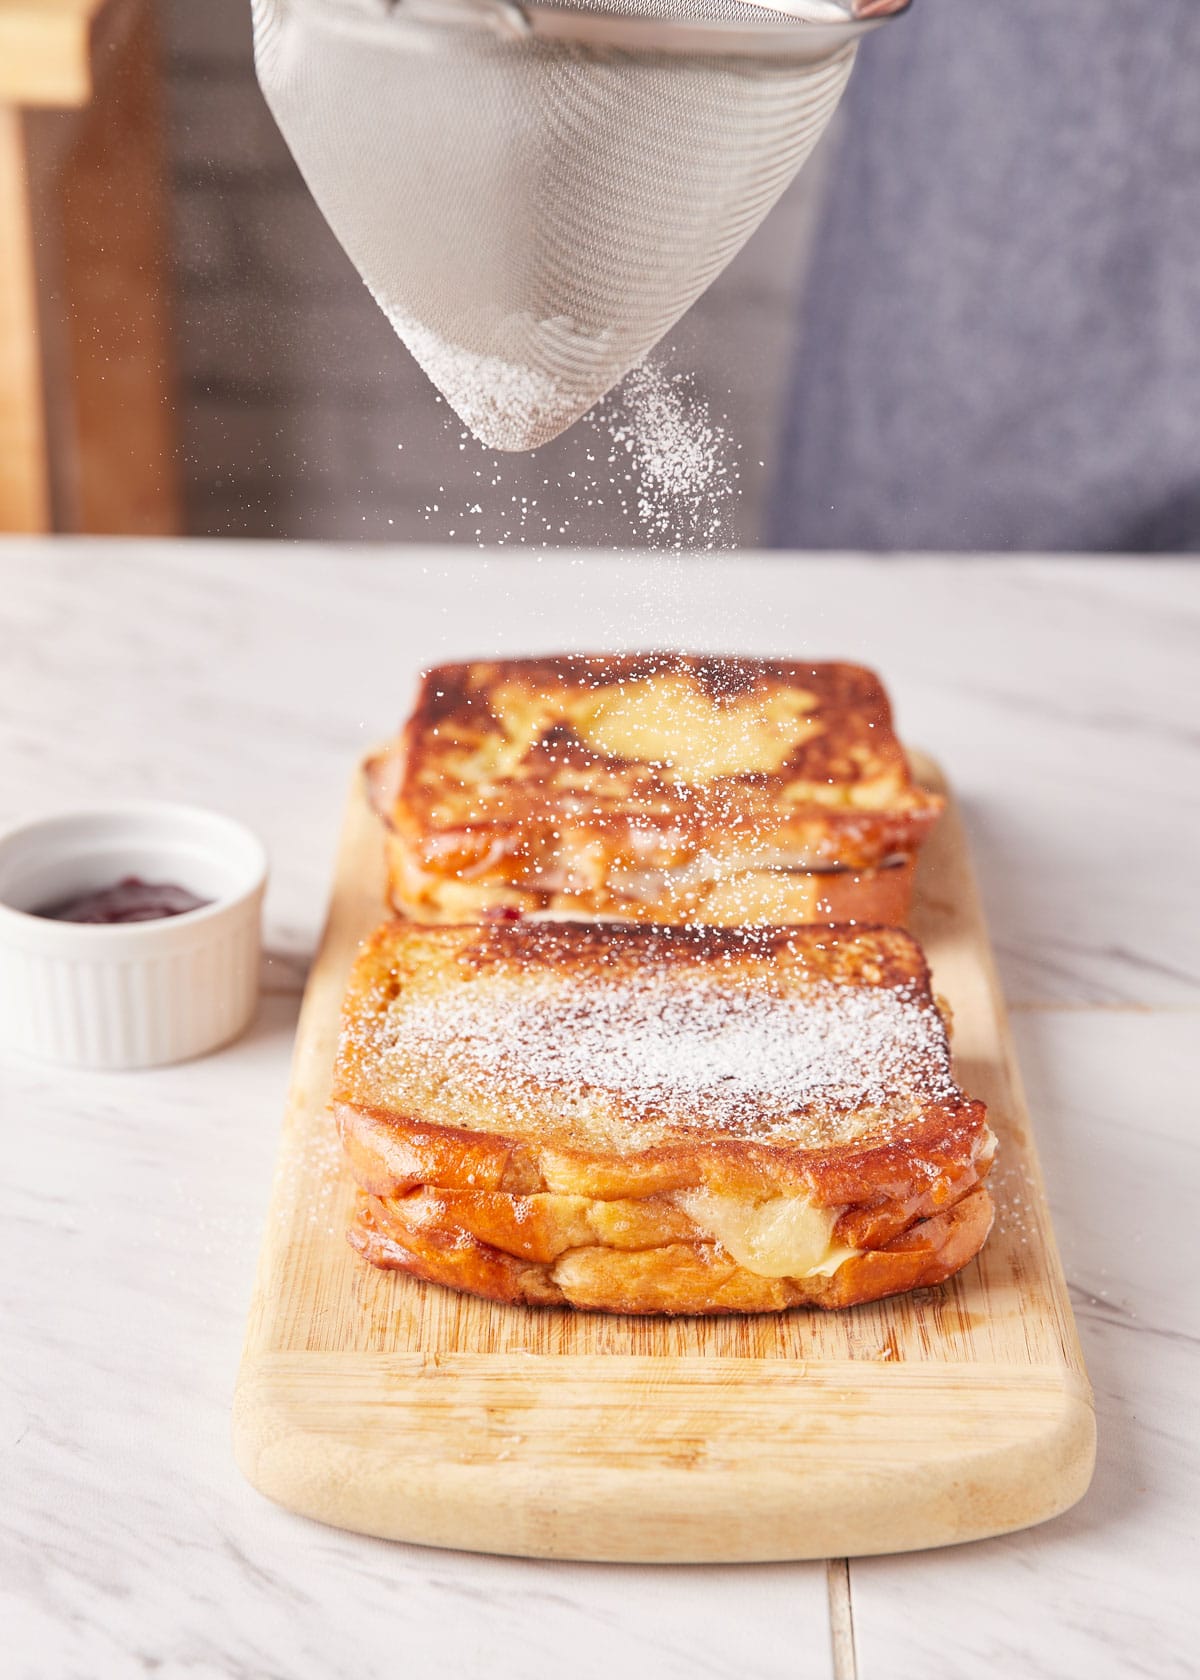 dusting powdered sugar onto a pan fried monte cristo sandwich on a wood board